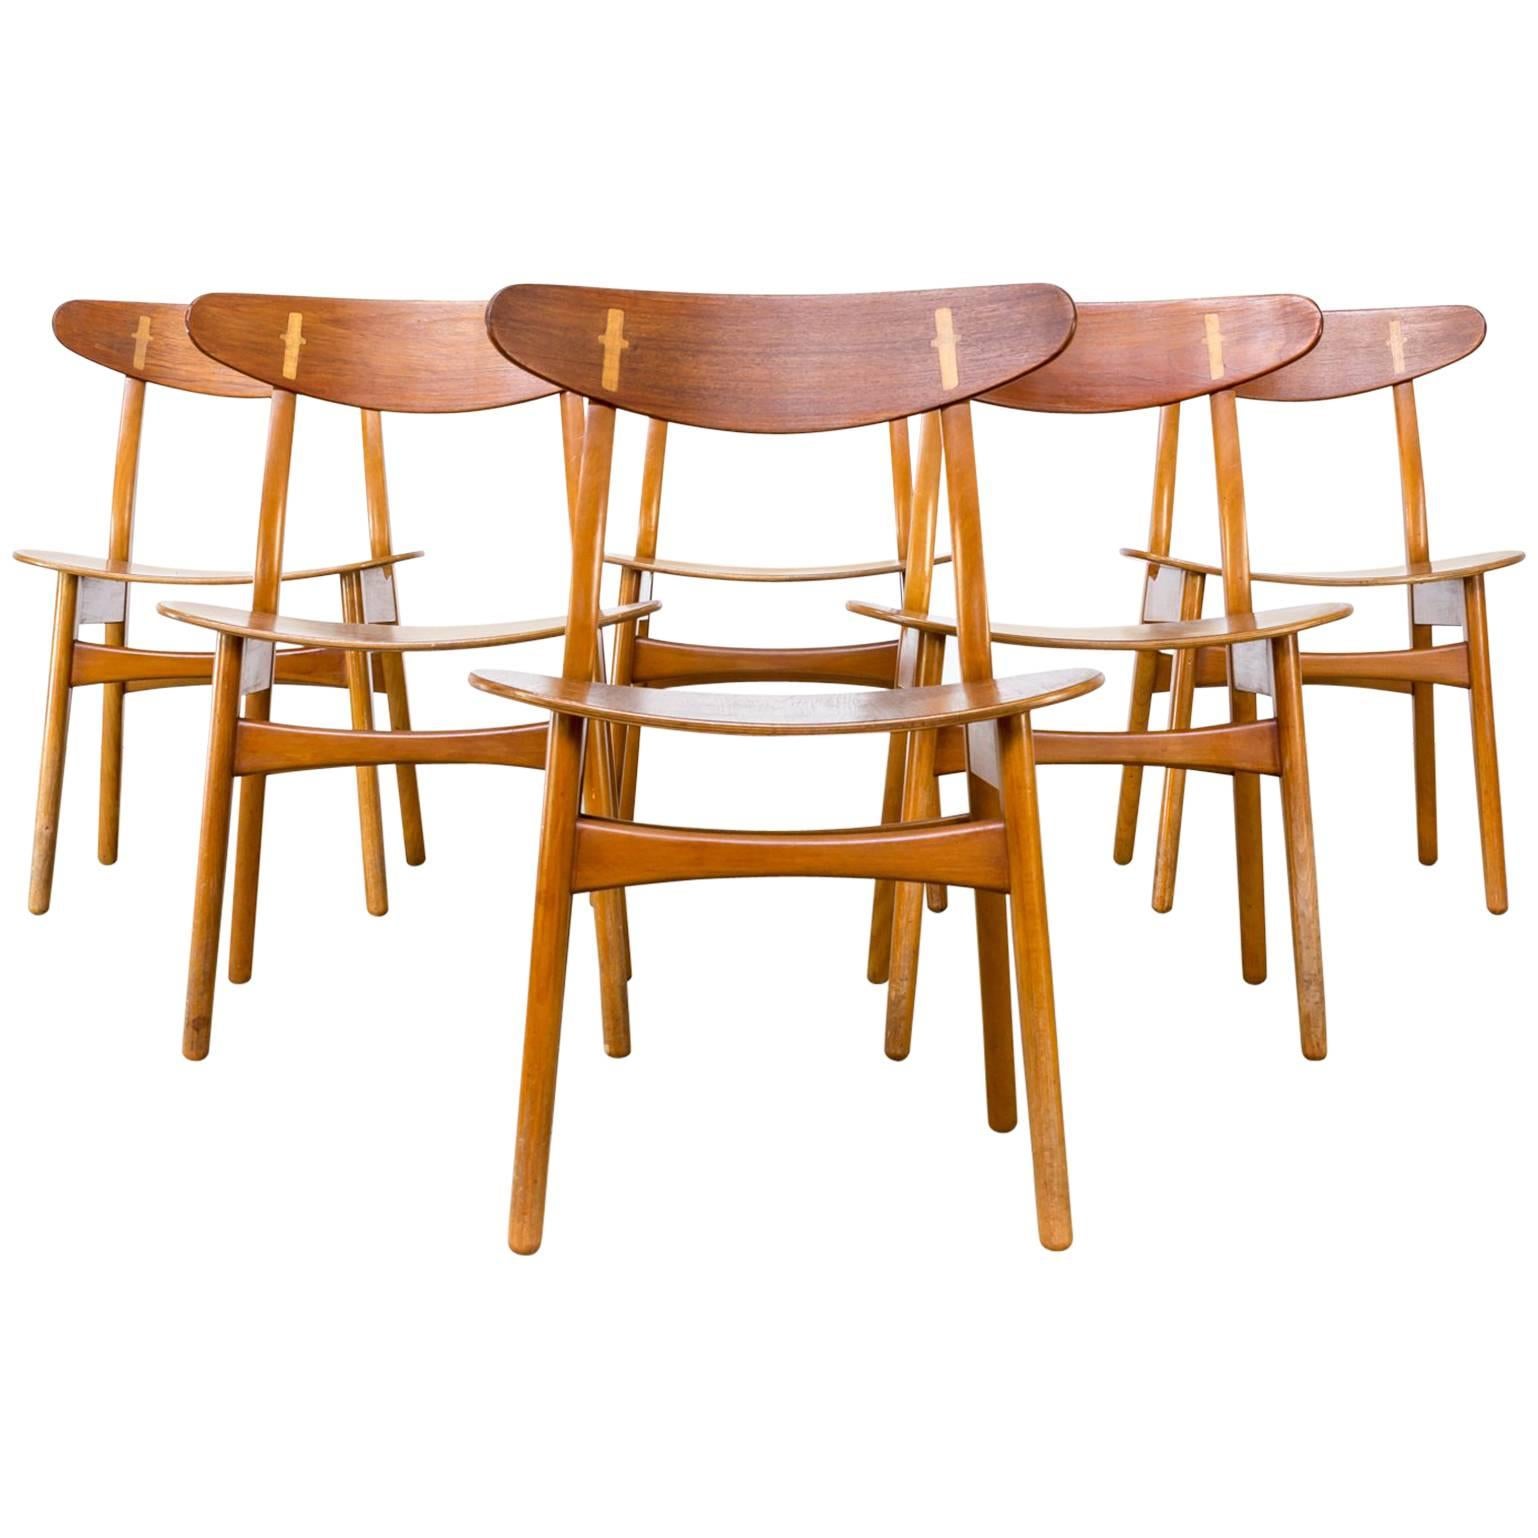 1950s Hans J Wegner CH-30 Dining Chairs for Carl Hansen & Son Set of Six For Sale